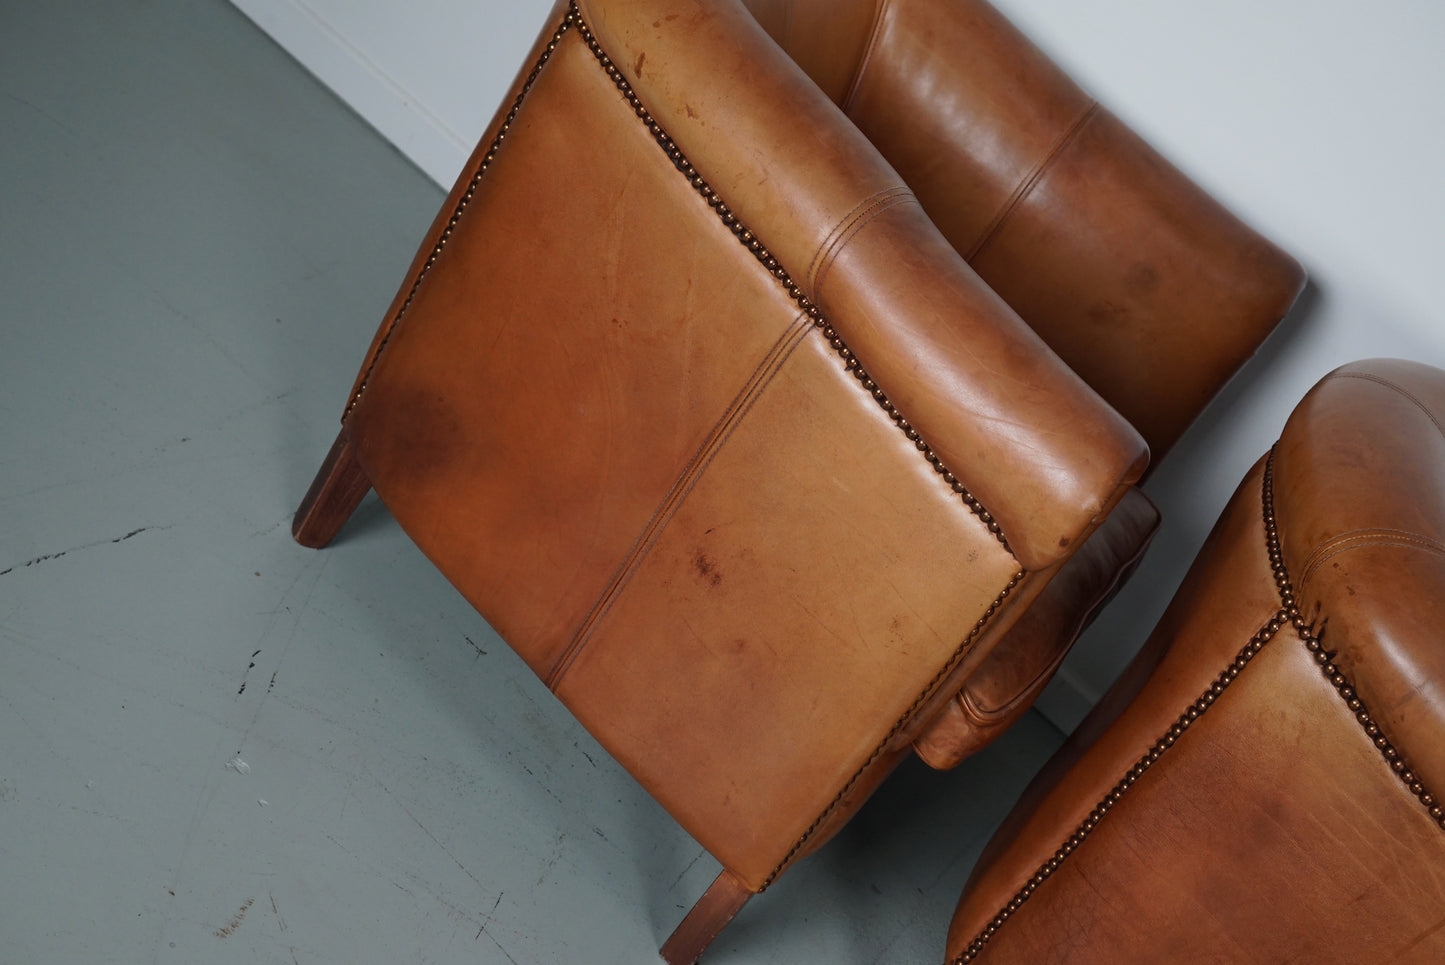 Vintage Dutch Cognac Leather Club Chairs, Set of Three with Two Footstools